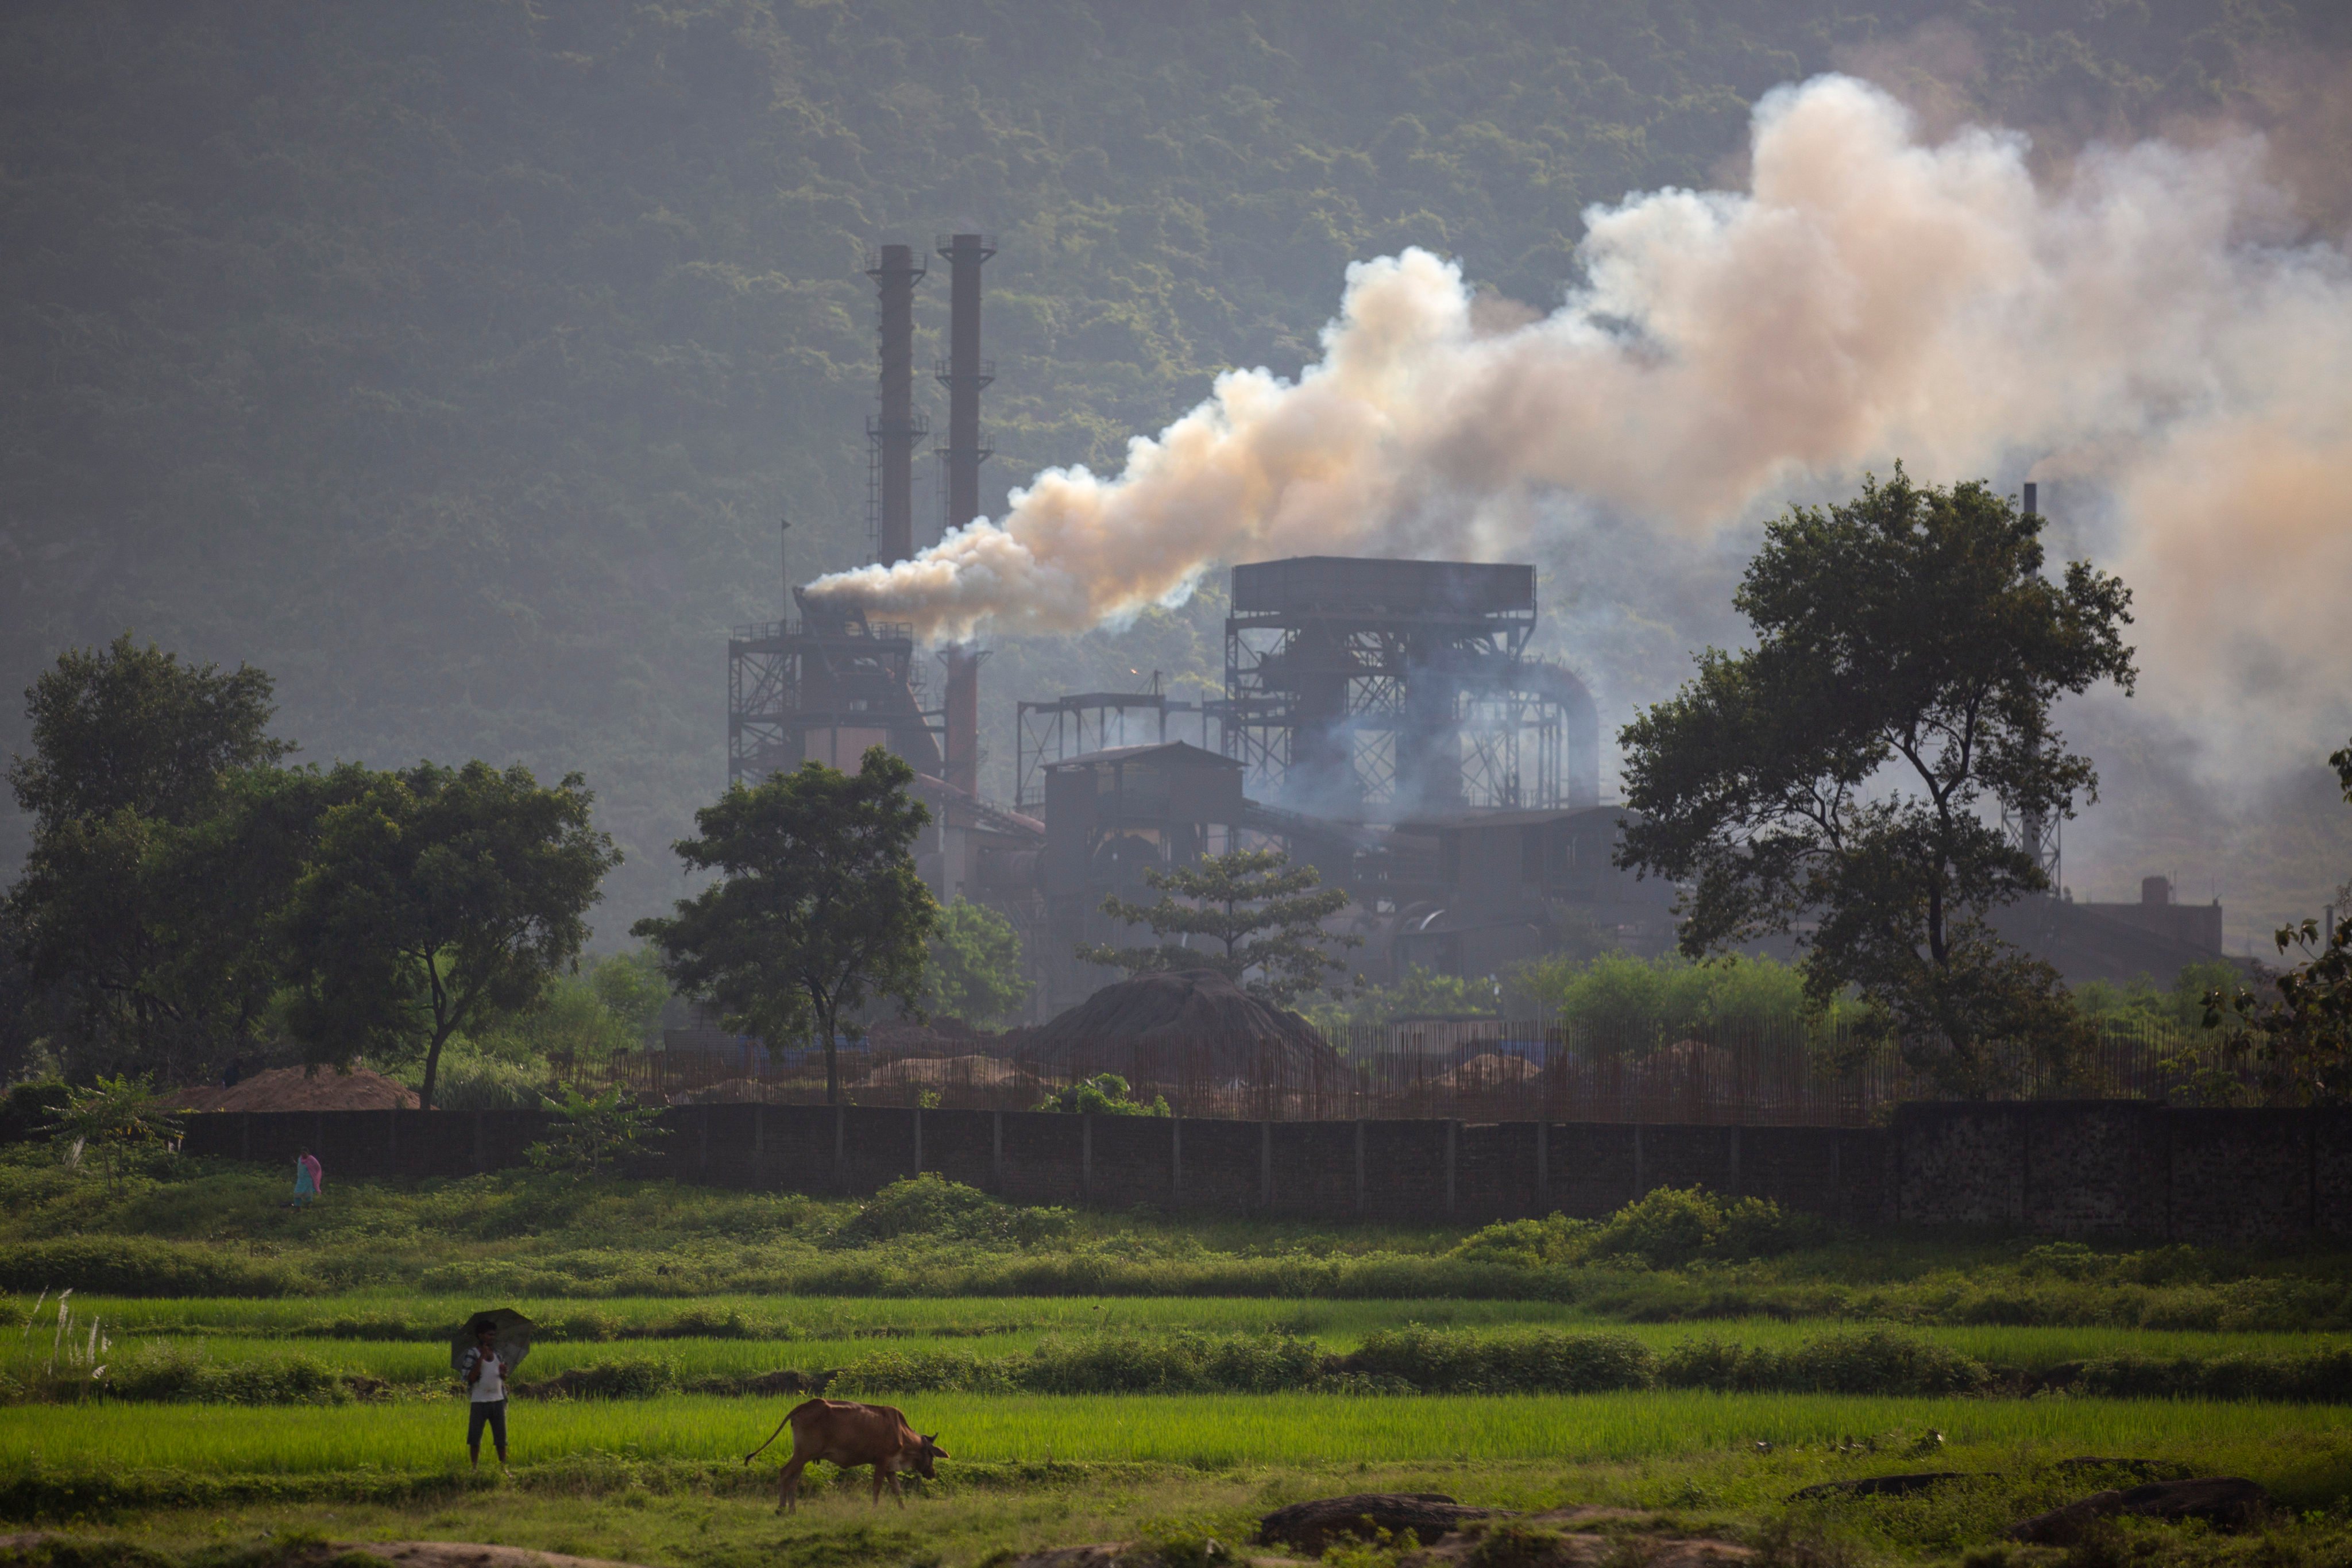 Smoke rises from a coal-powered steel plant at Hehal village near Ranchi, in eastern Jharkhand state, in India. The key priority for India at the upcoming UN climate conference will be how to pay for the transition away from fossil fuels for energy and industries to meet temperature-limit targets, according to a senior official who will be part of the negotiations. Photo: AP